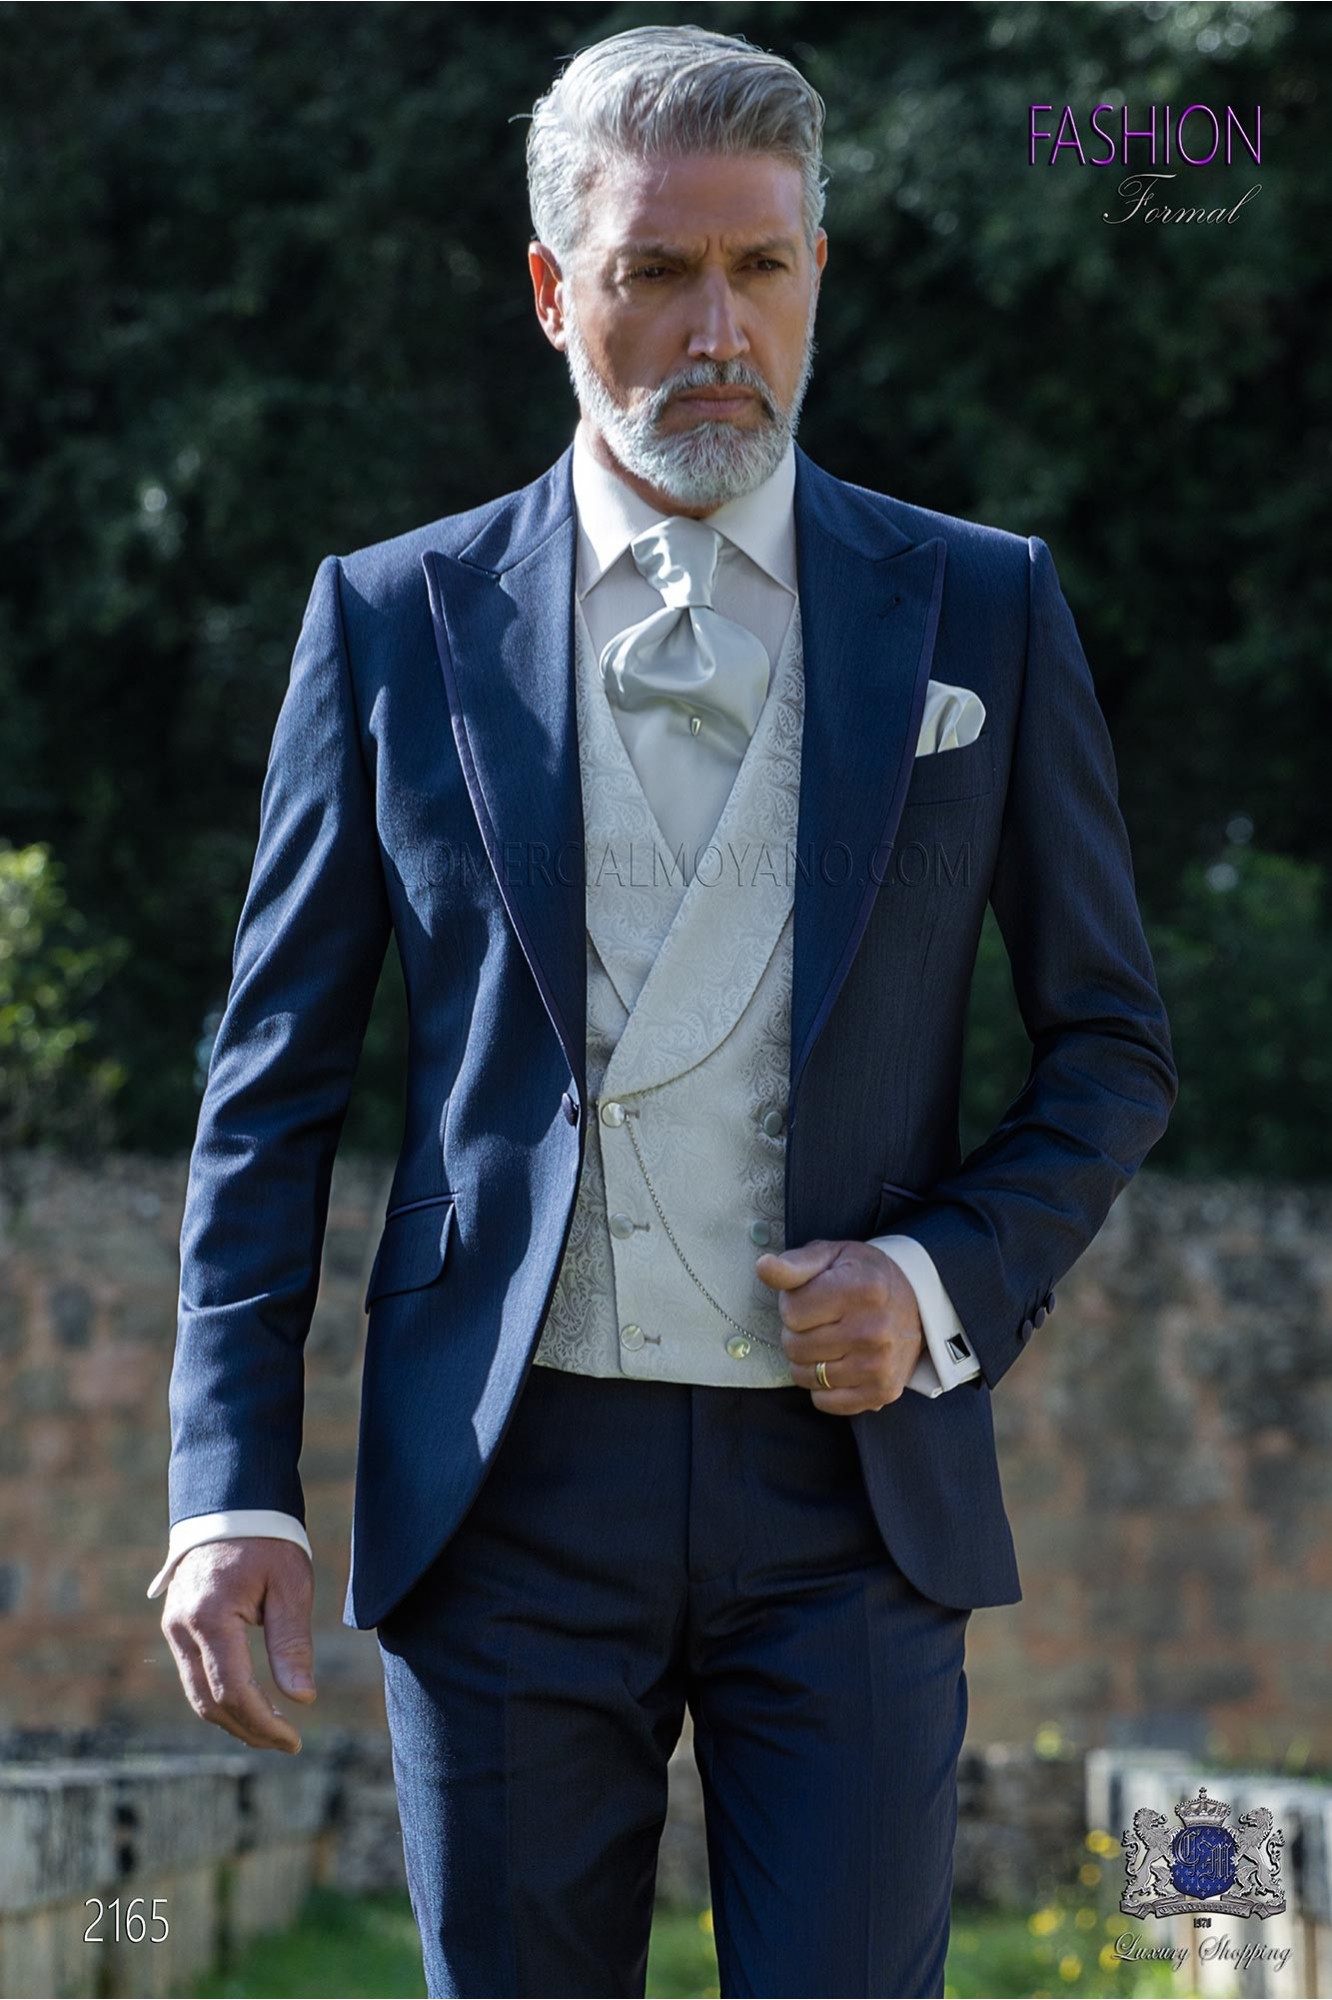 Italian wedding suit Slim stylish cut. Peak lapel with contrast fabric piping. Made from wool and acetate fabric in blue. model 2165 Mario Moyano